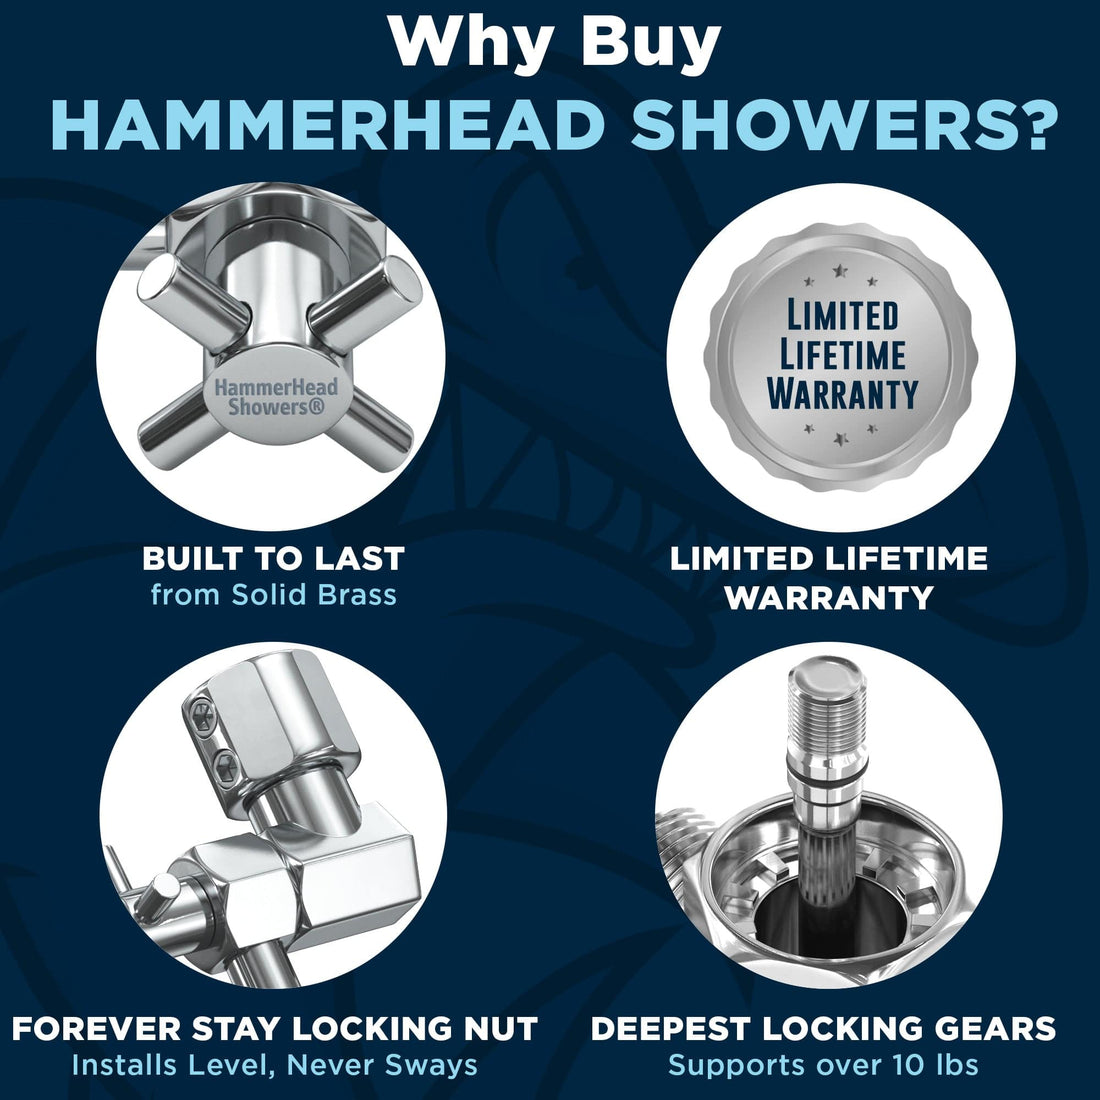 (Why Buy HammerHead Showers) 16 Inch Adjustable Shower Arm Extension Pipe Raise or Lower Shower Head Height Deepest Locking Gears On The Market Chrome / 16 Inch - The Shower Head Store